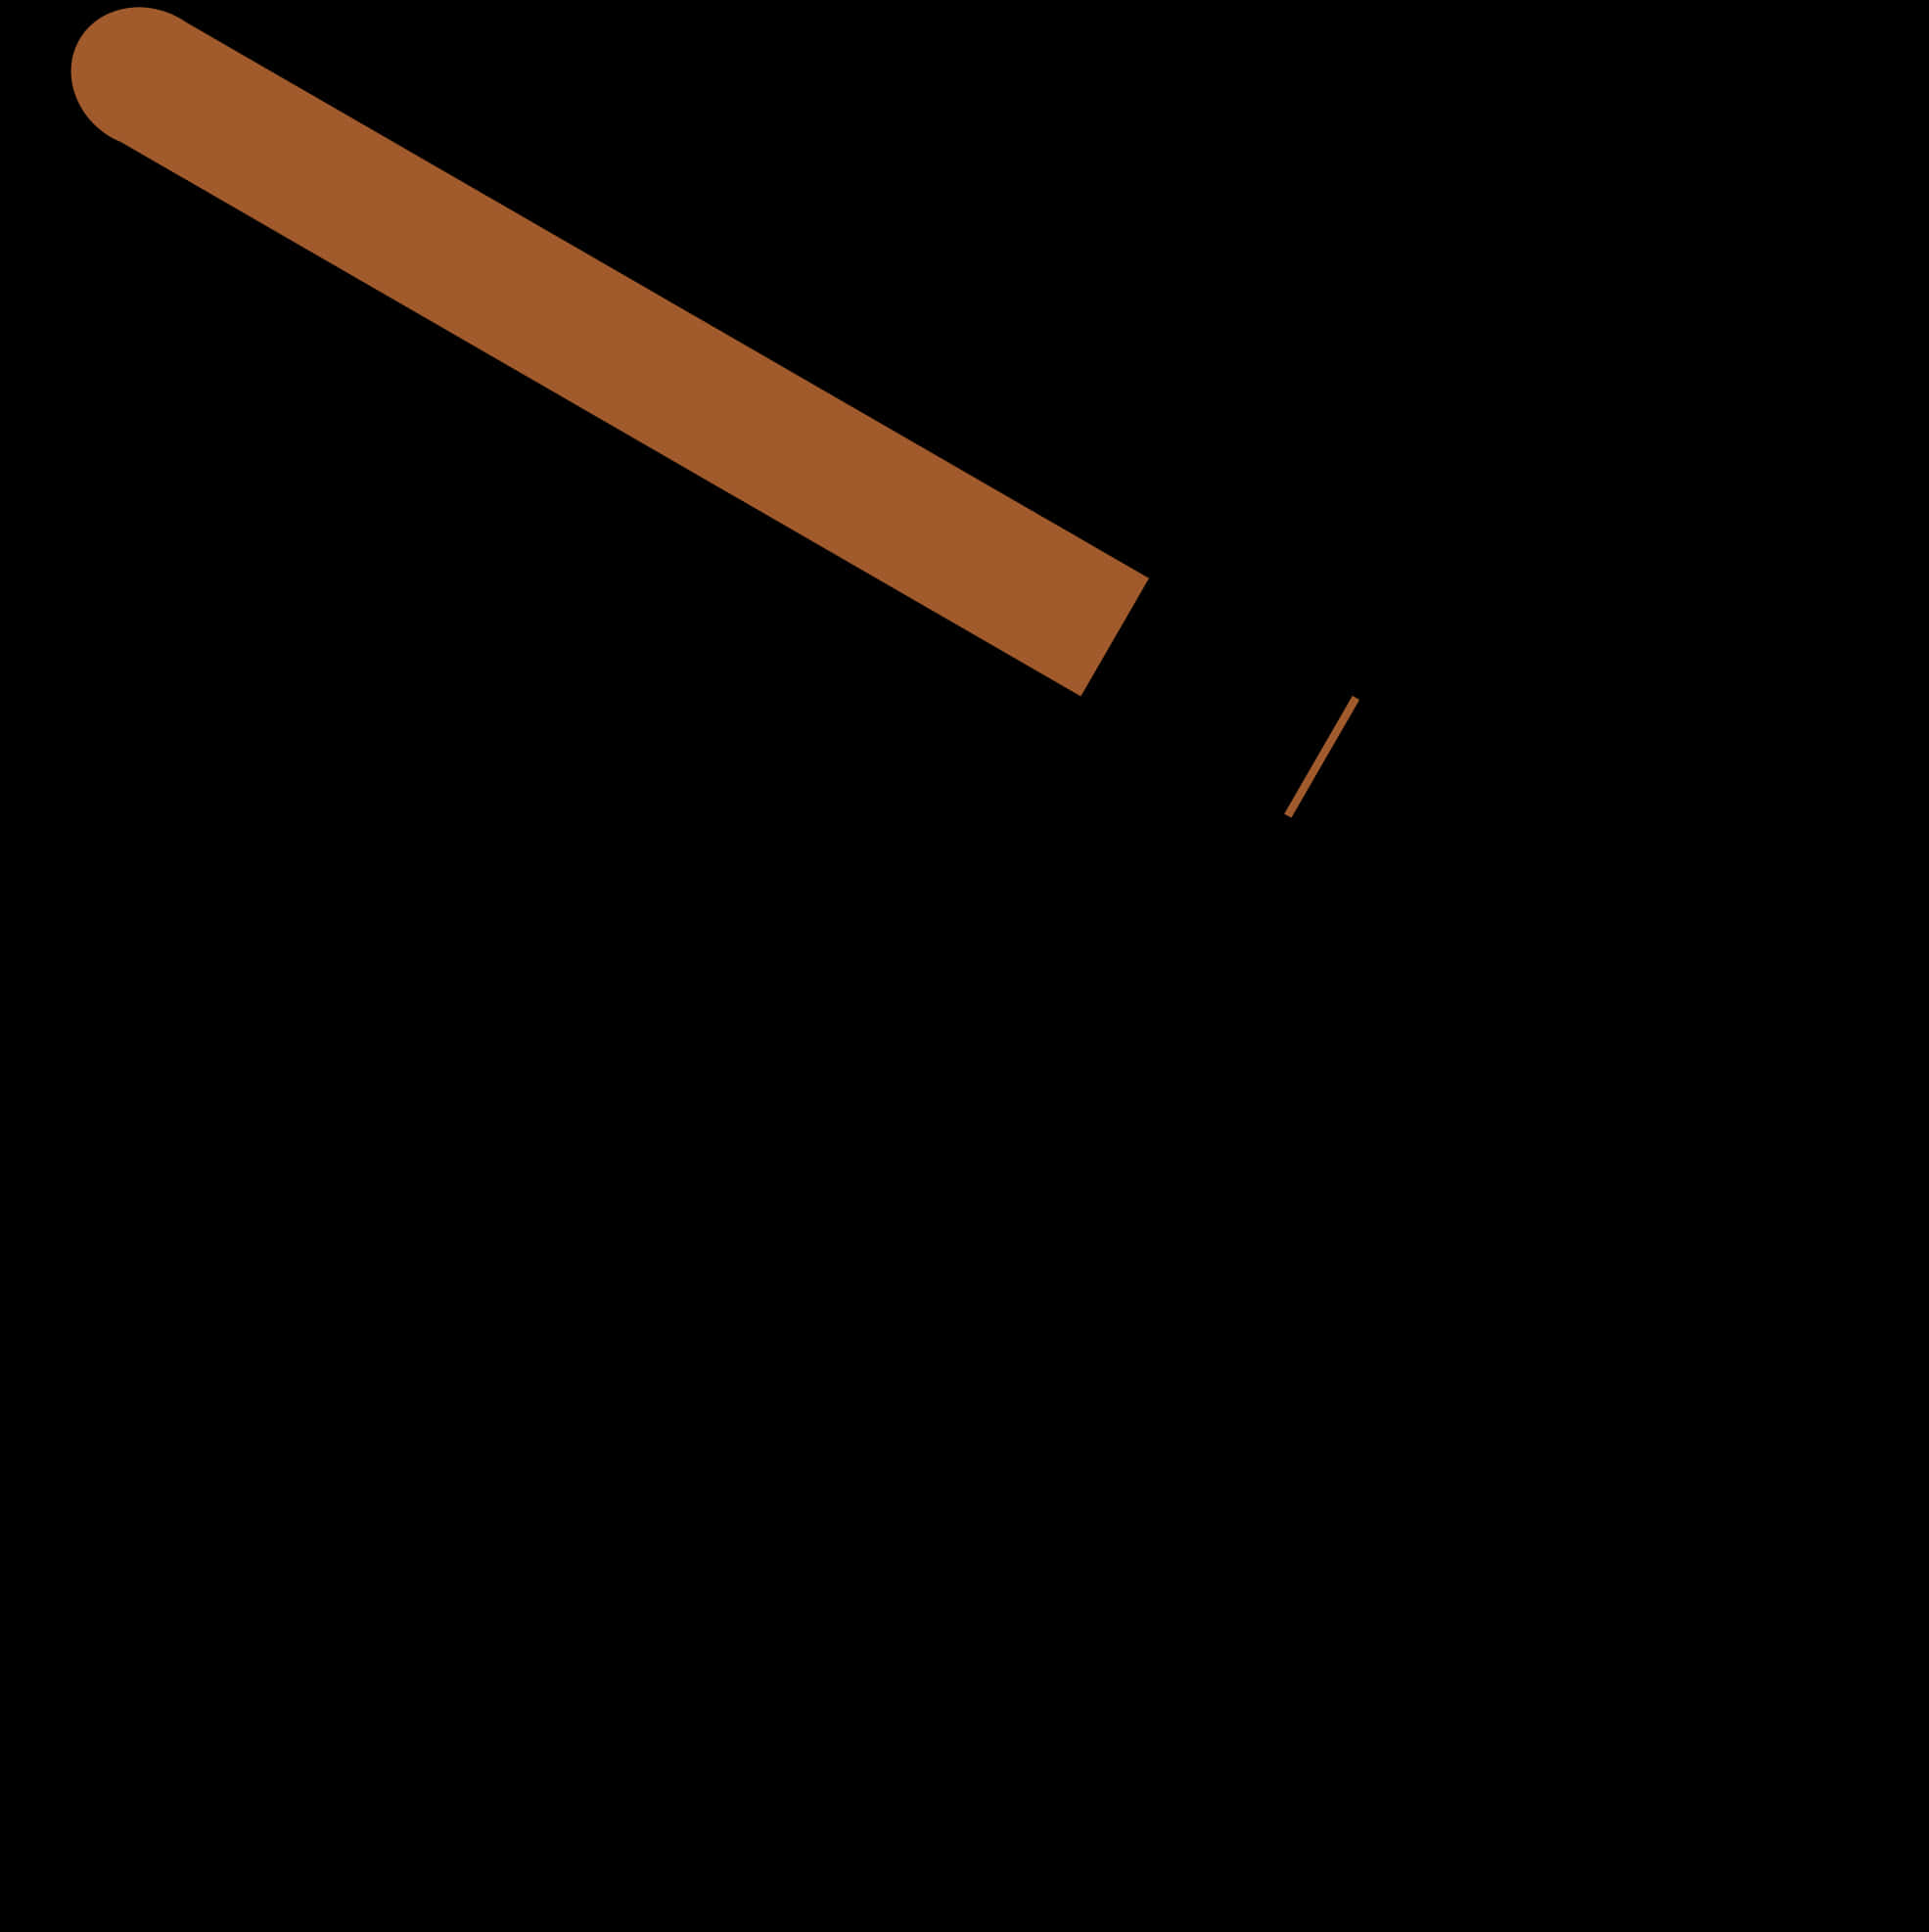 A Black Background With A Brown Object In The Air